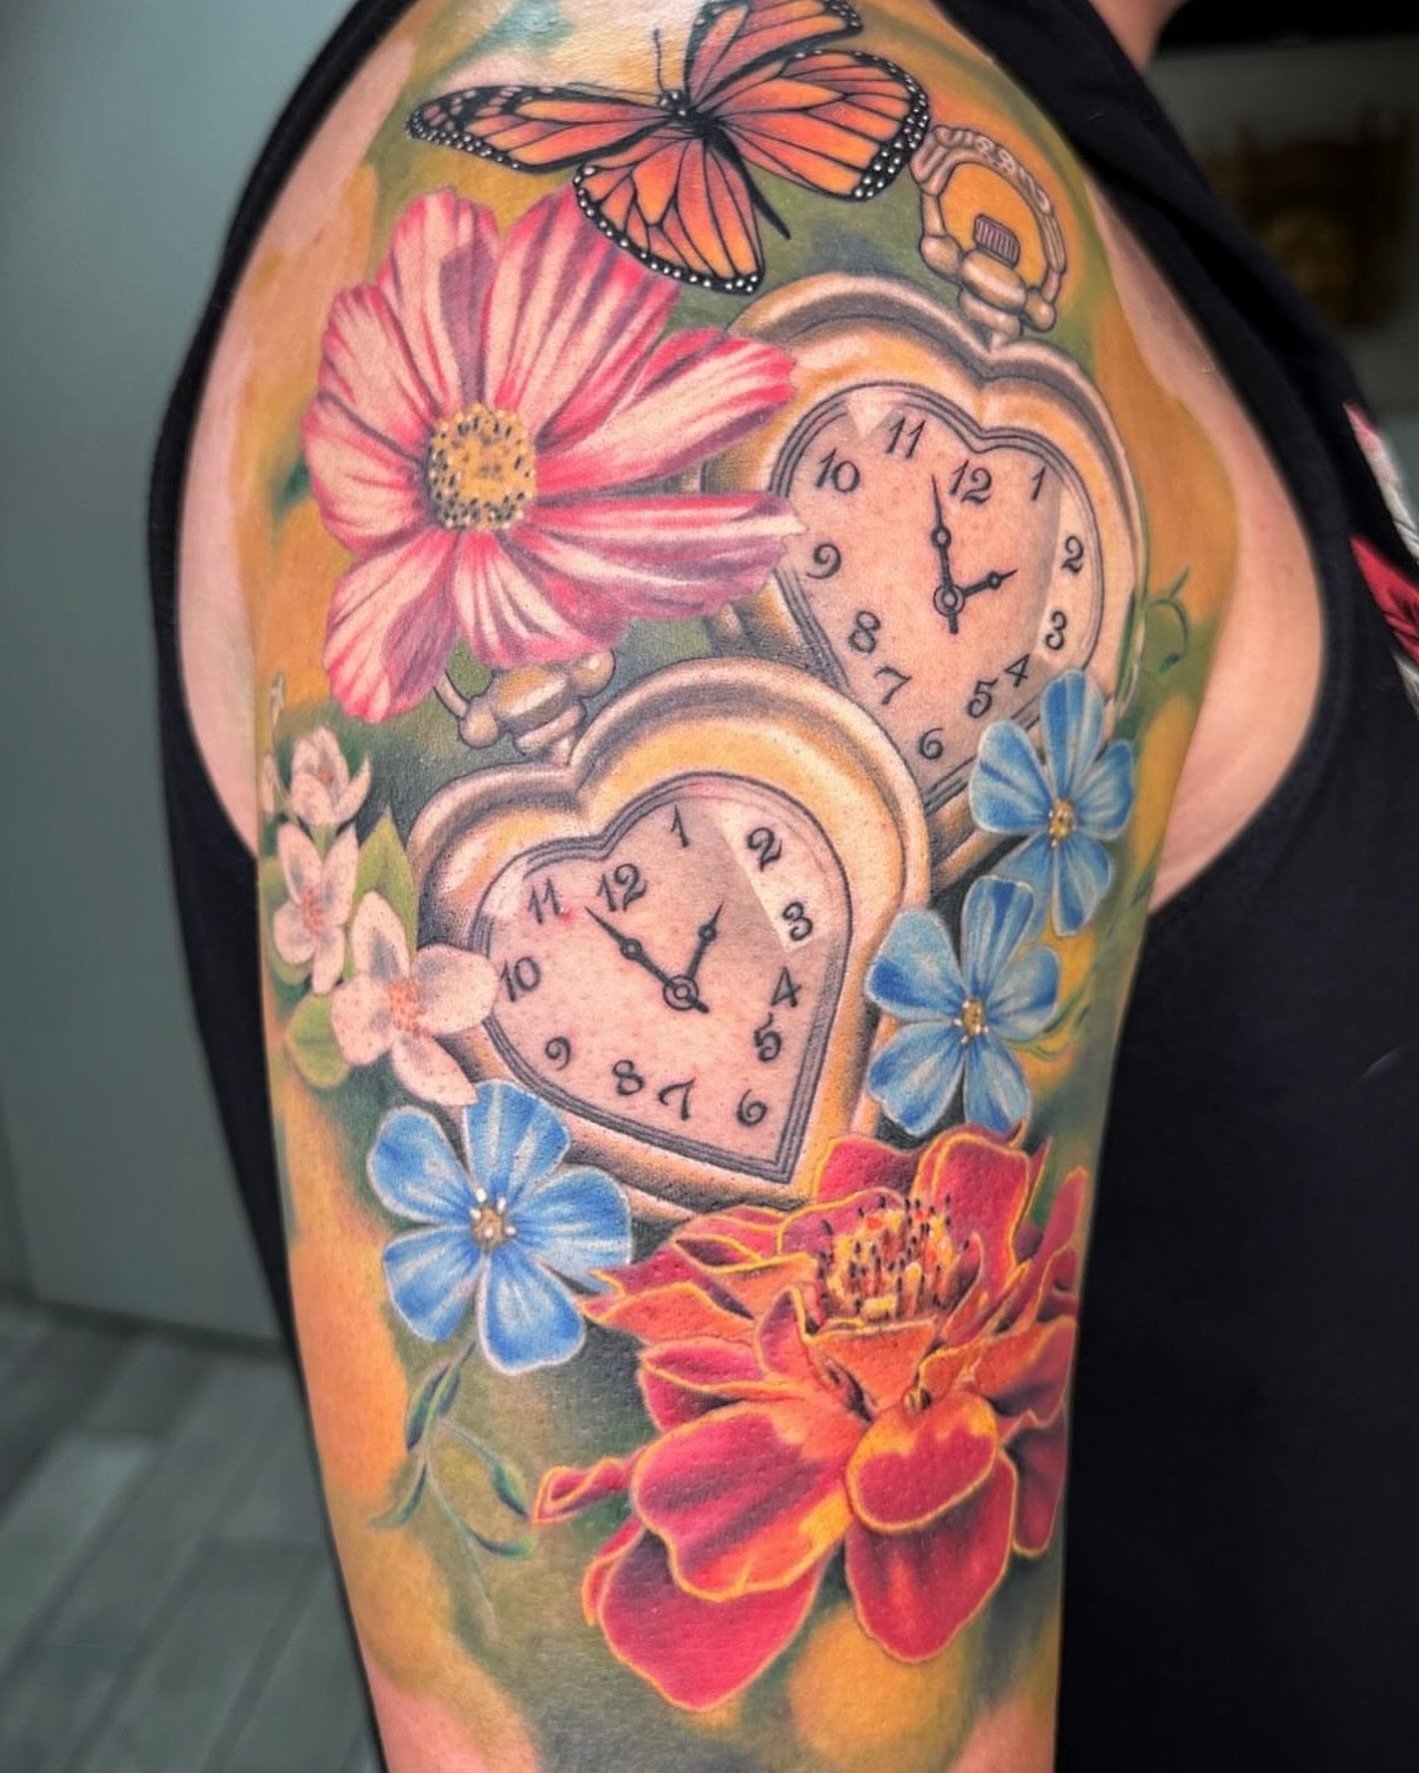 🌹🌸Completed half sleeve done by @neri_ramirez a few final touchups completed this #colorful flower, and timeclock piece! To schedule an appointment with Neri you can have over to his website at neriramirez.com #adornmentbodyart #adornmentstudios #a